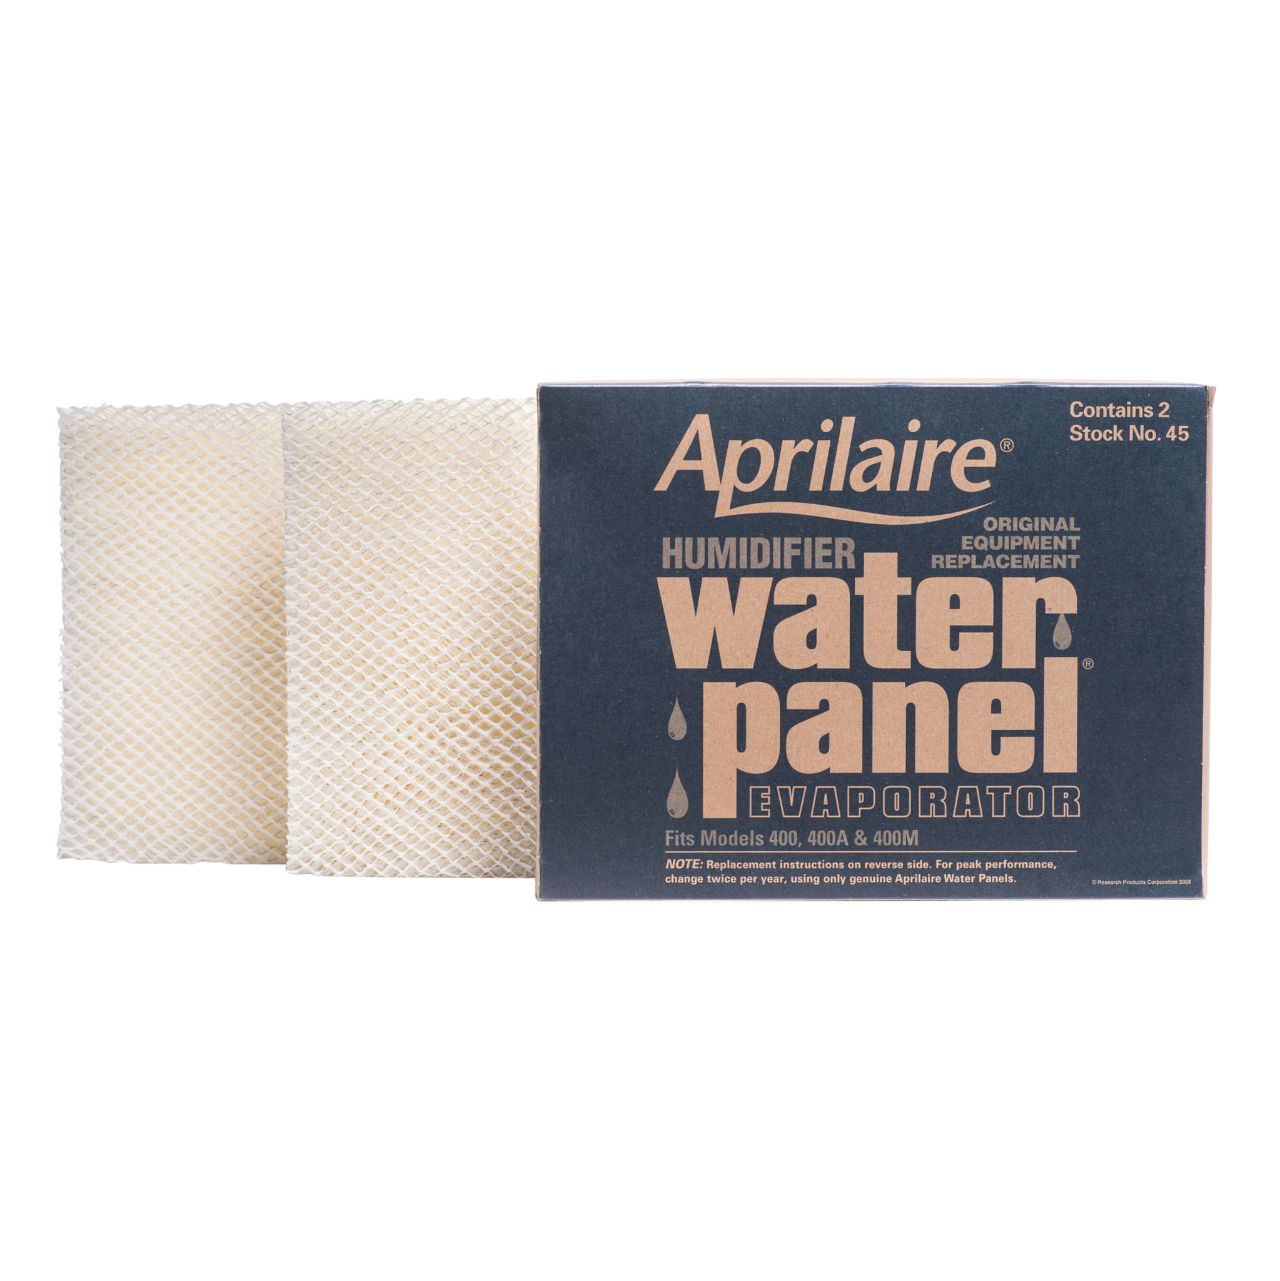 Aprilaire Water Panel Evaporators For Models 400, 400a And 400m. 2172109